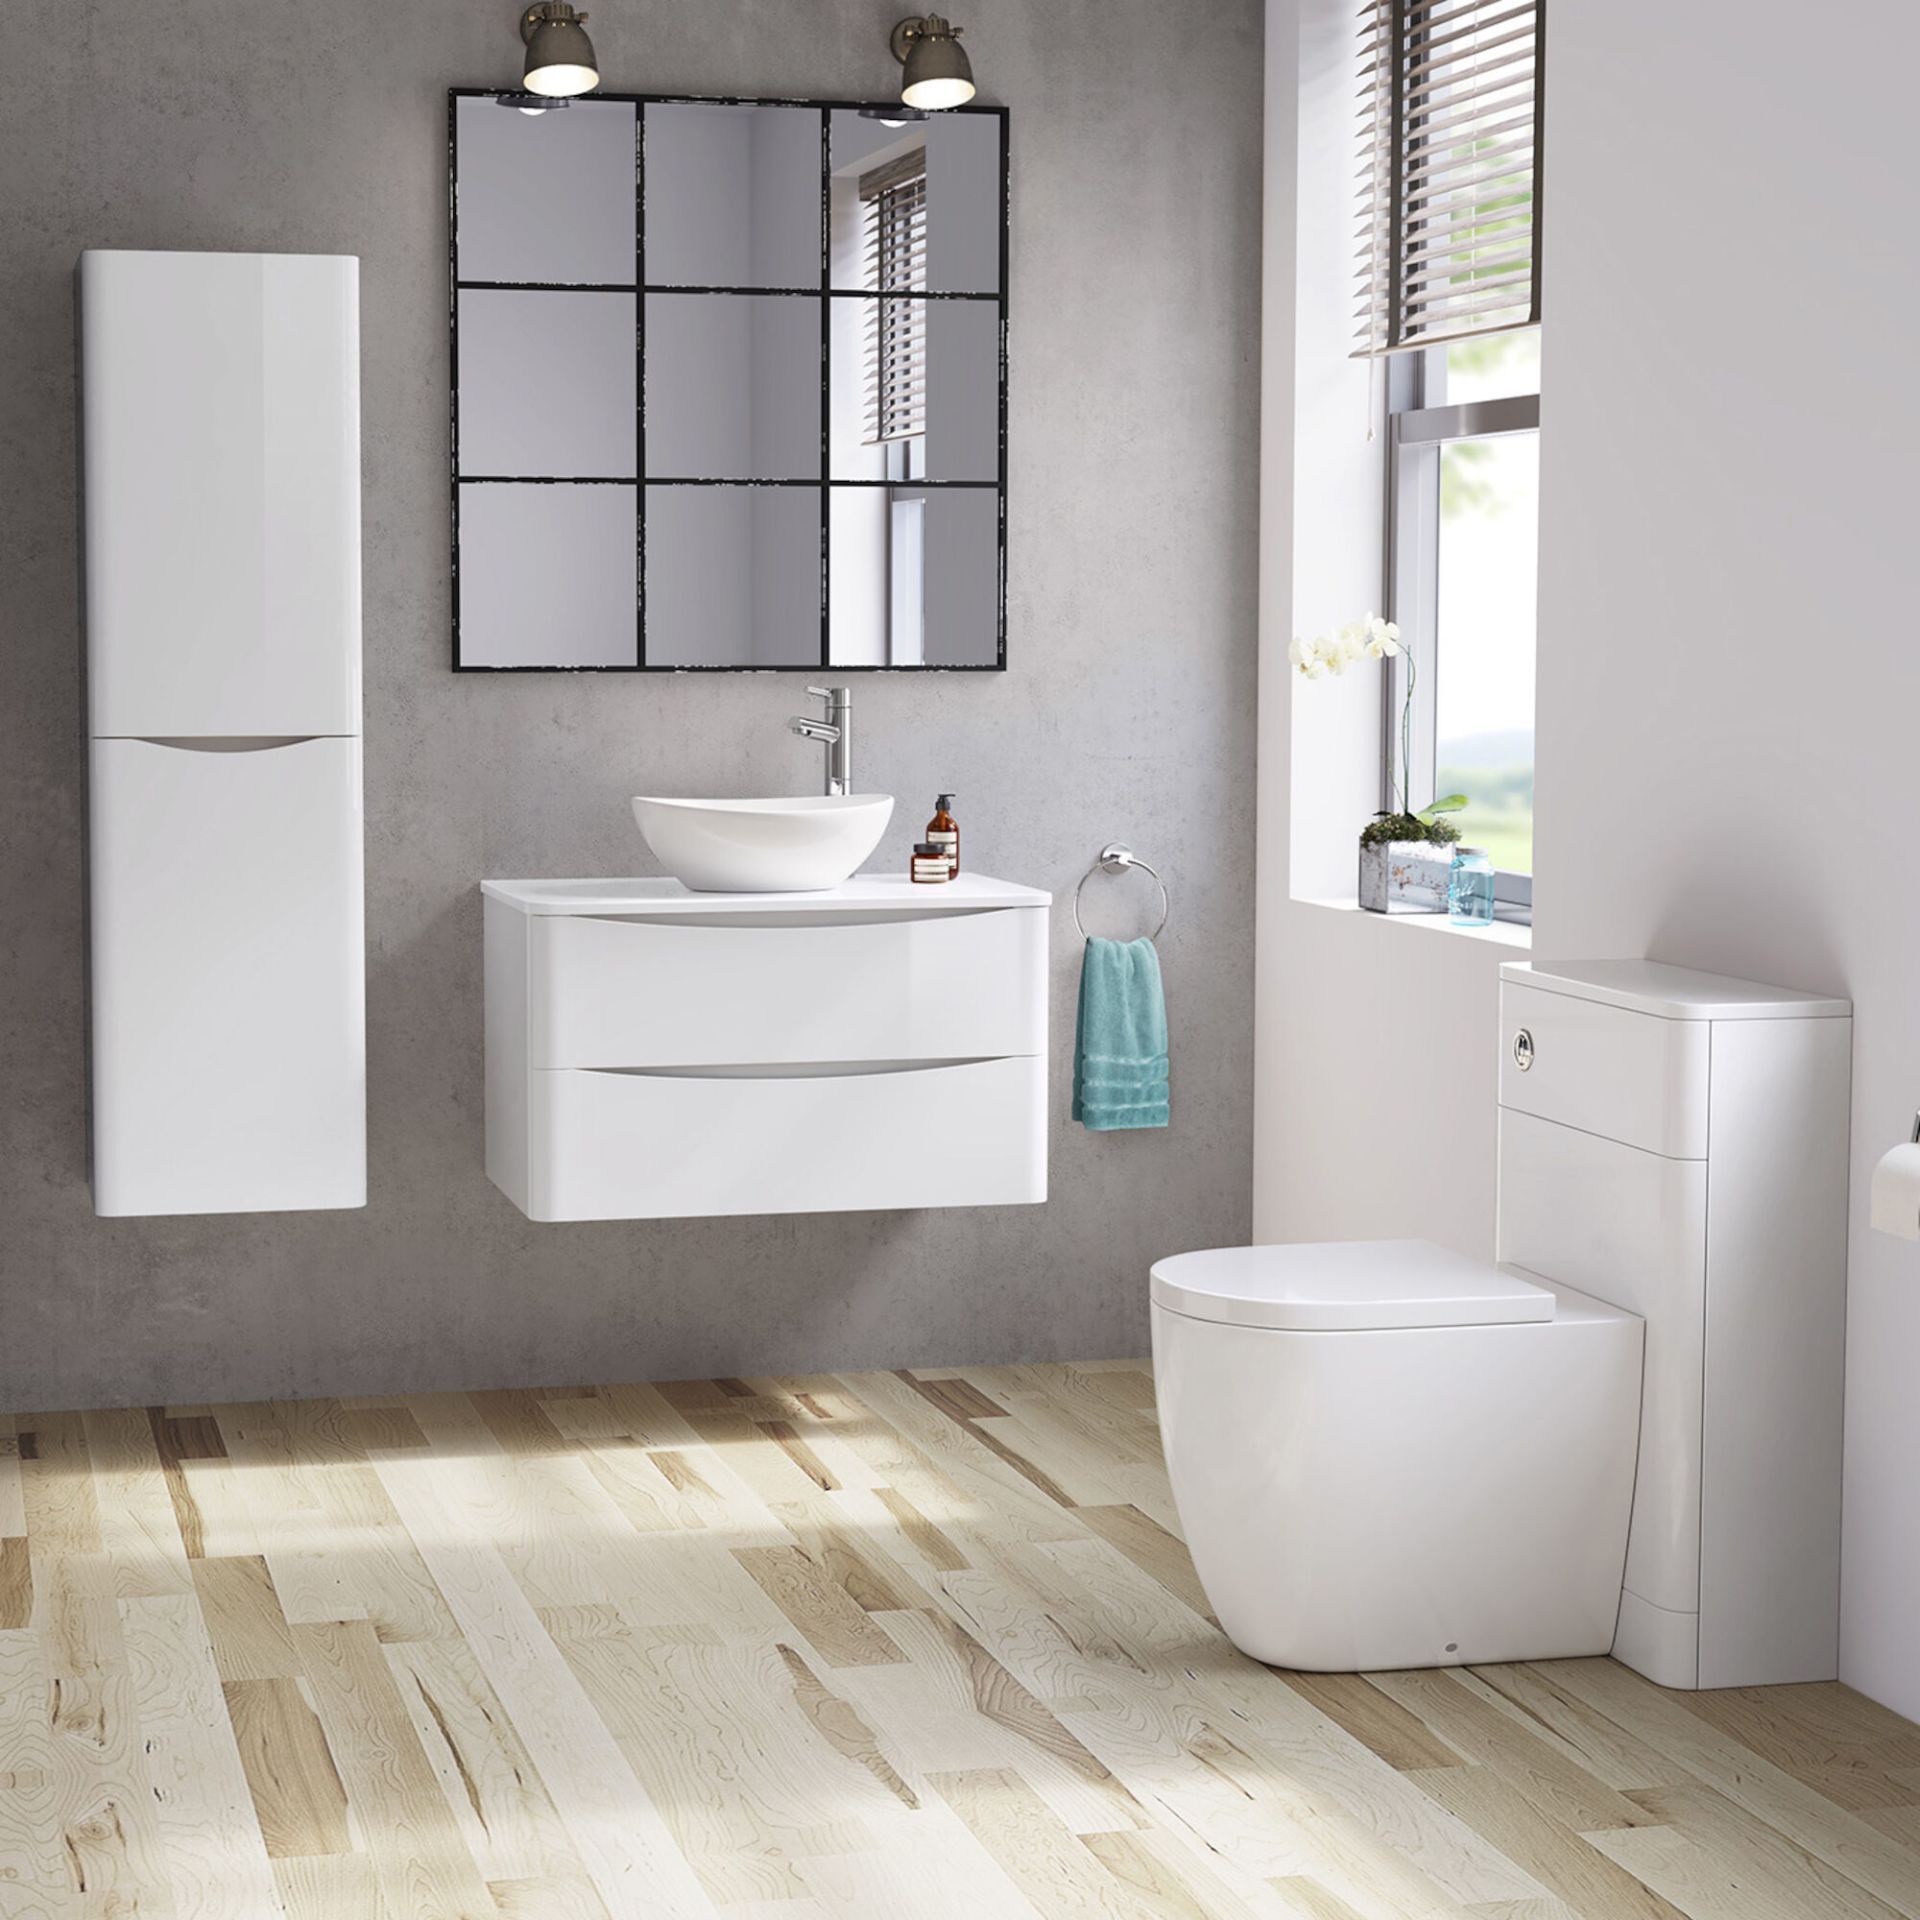 NEW & BOXED 1000mm Austin II Gloss White Countertop Unit and Camila Basin - Wall Hung. RRP £999.99. - Image 2 of 2